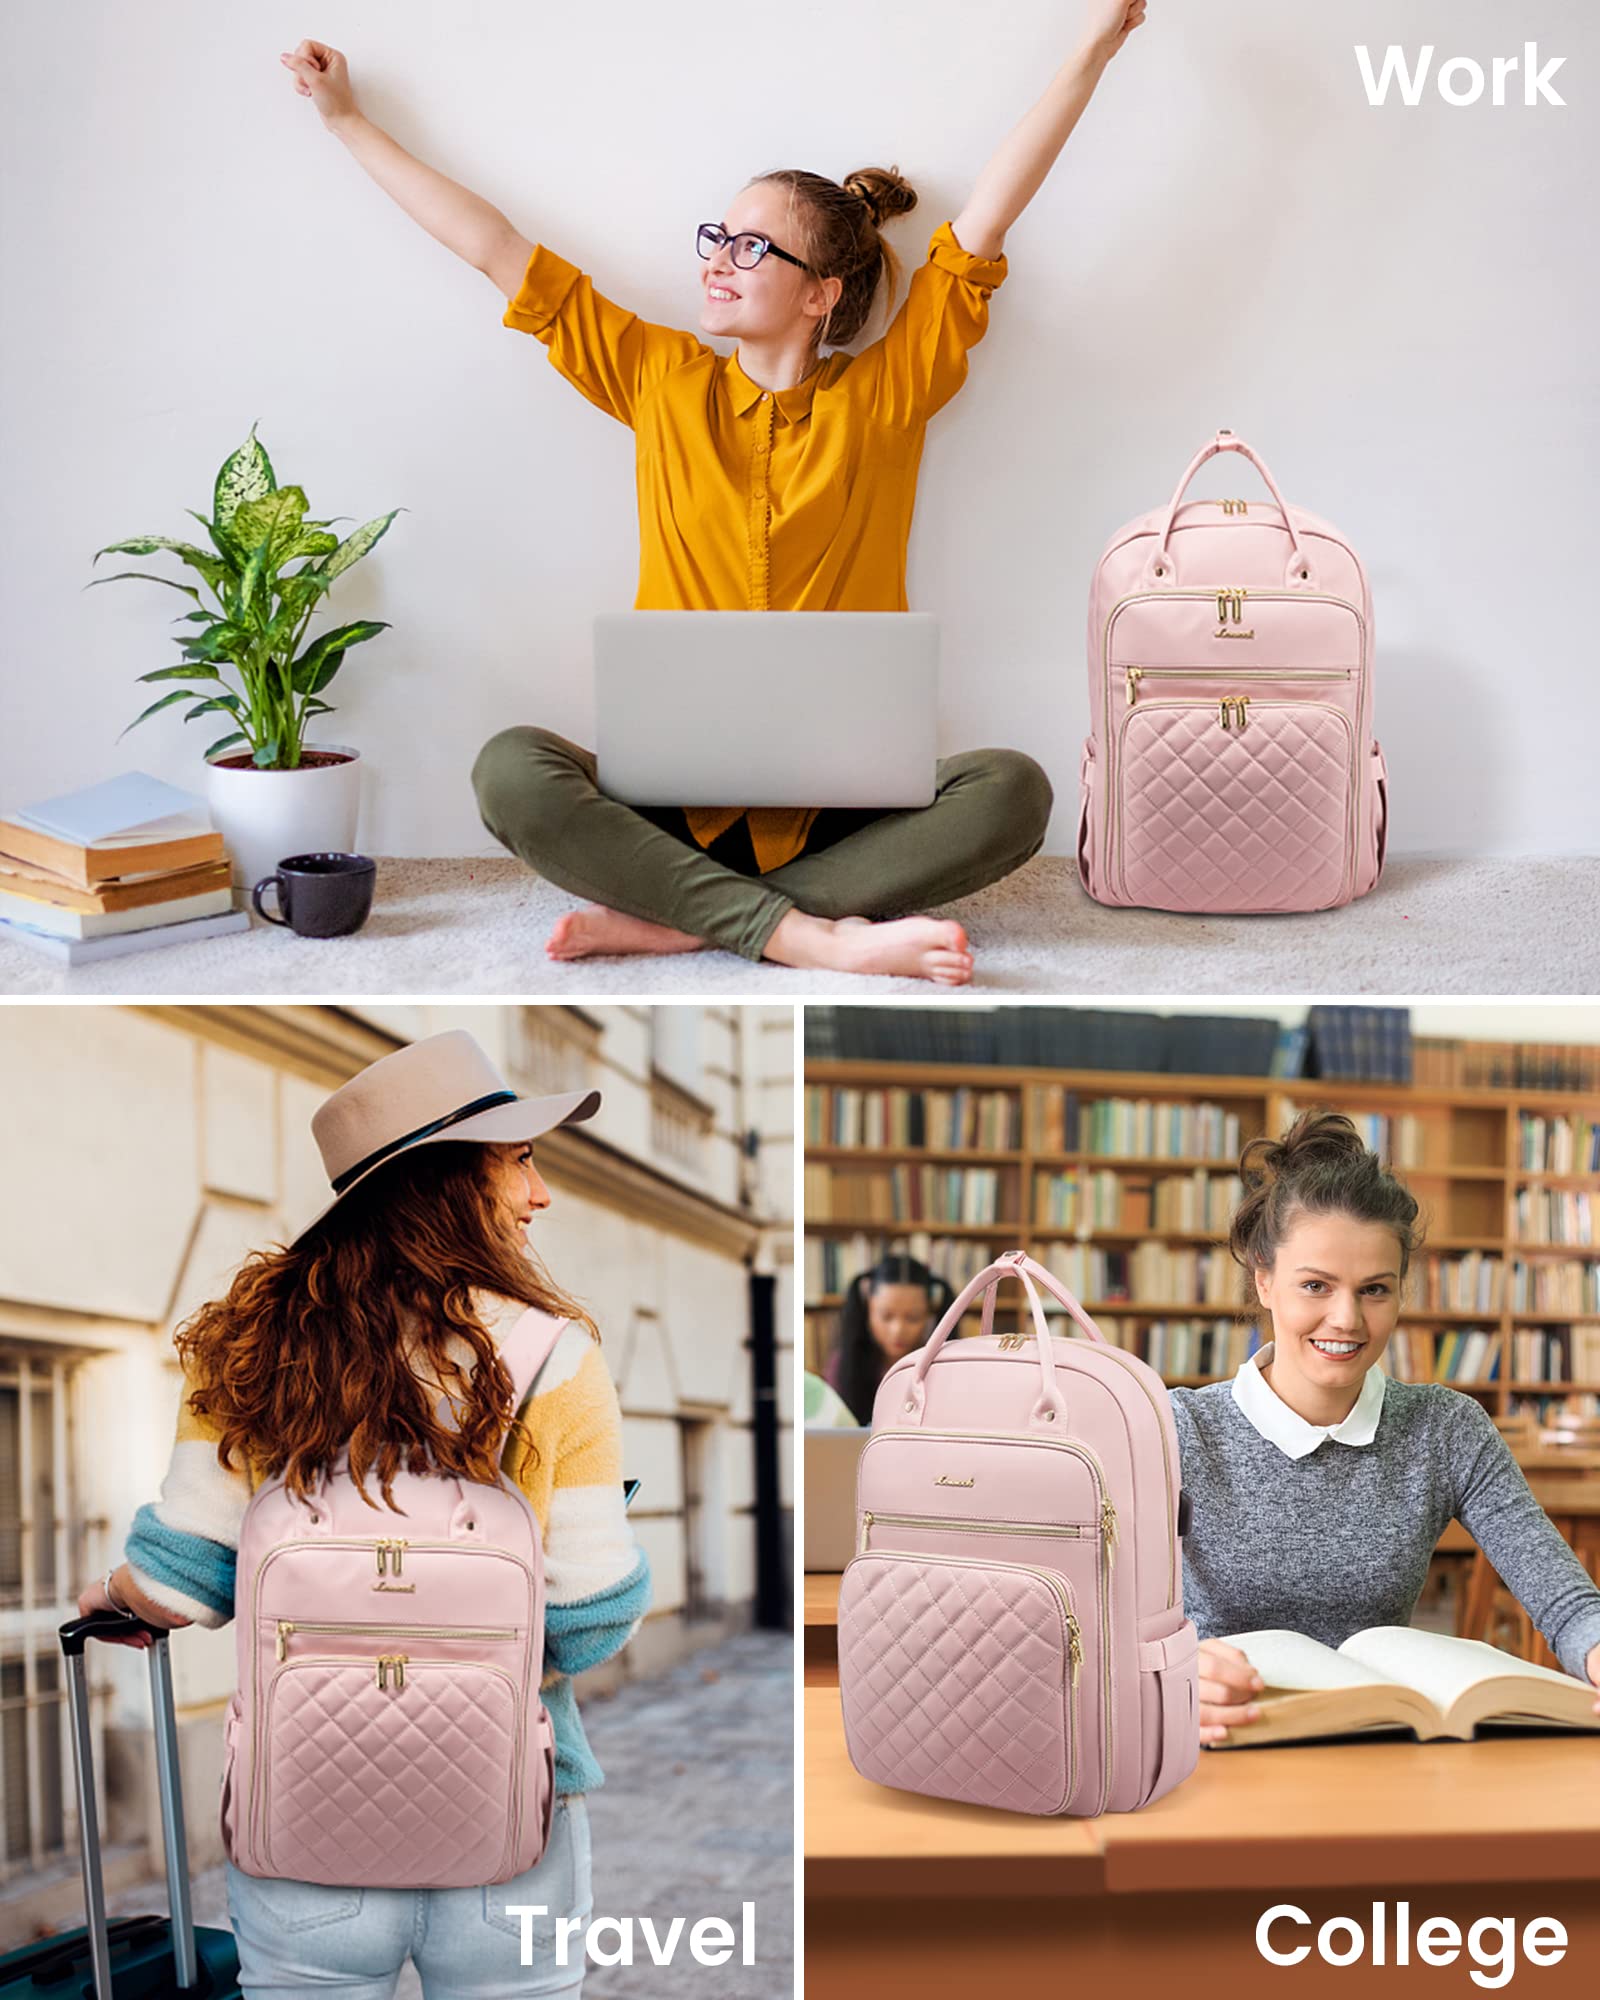 LOVEVOOK Laptop Backpack for Women, 15.6 Inch Computer Backpack for Teacher Nurse with Water Resistant, Lightweight Travel Work Backpack with USB Charging Port, Quilted Commuter Backpack purse, Pink